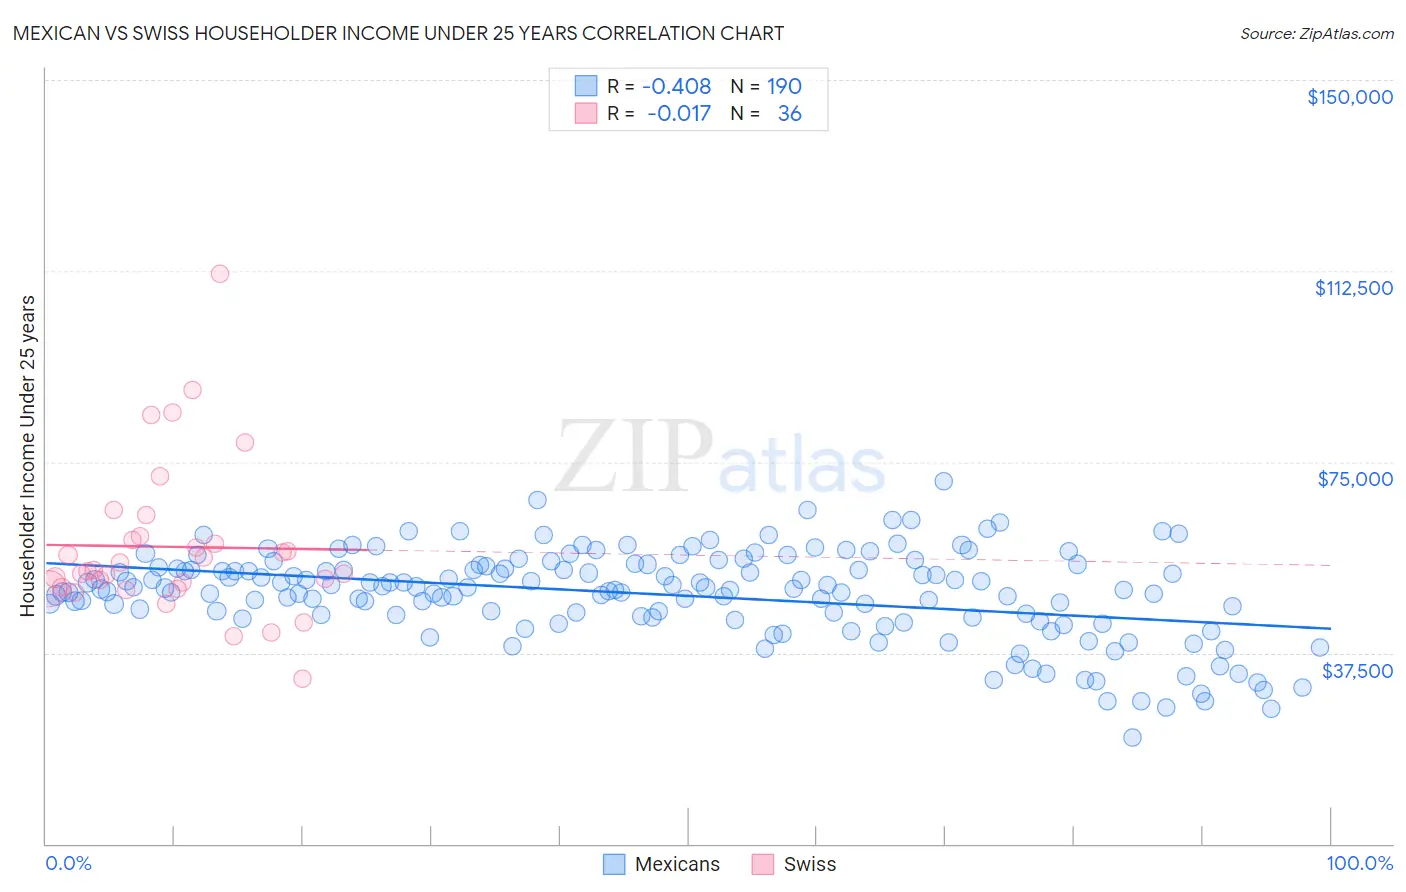 Mexican vs Swiss Householder Income Under 25 years